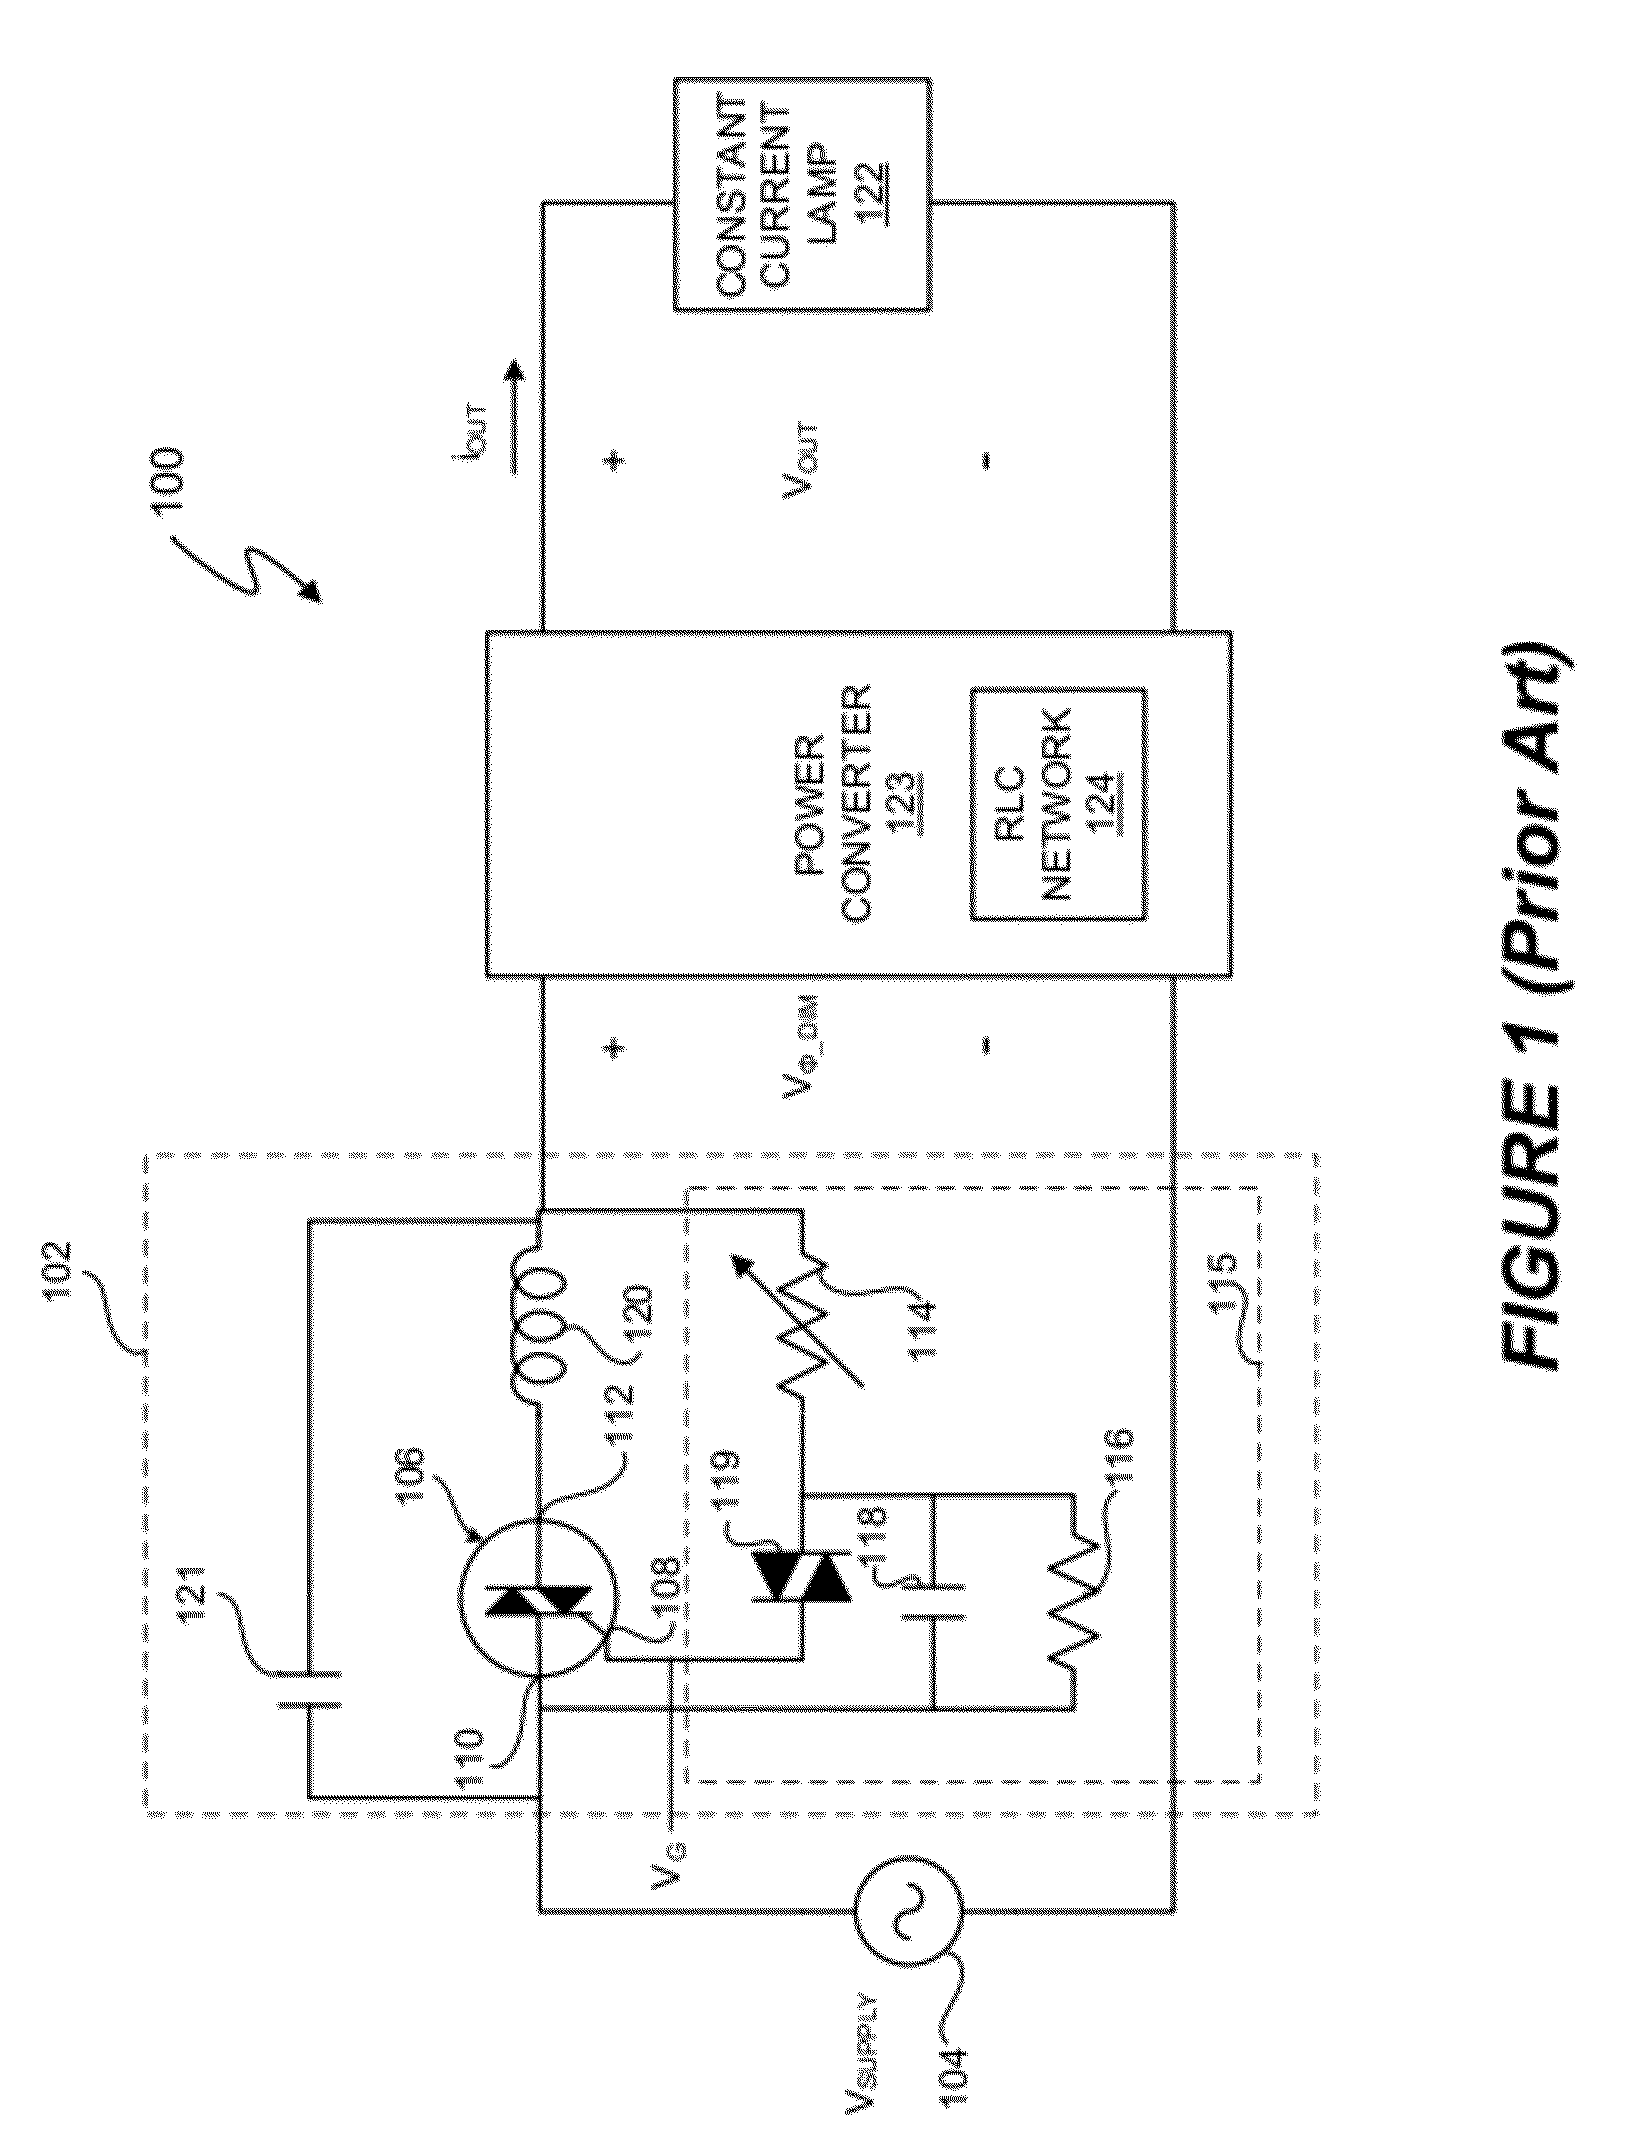 Multi-Mode Dimmer Interfacing Including Attach State Control